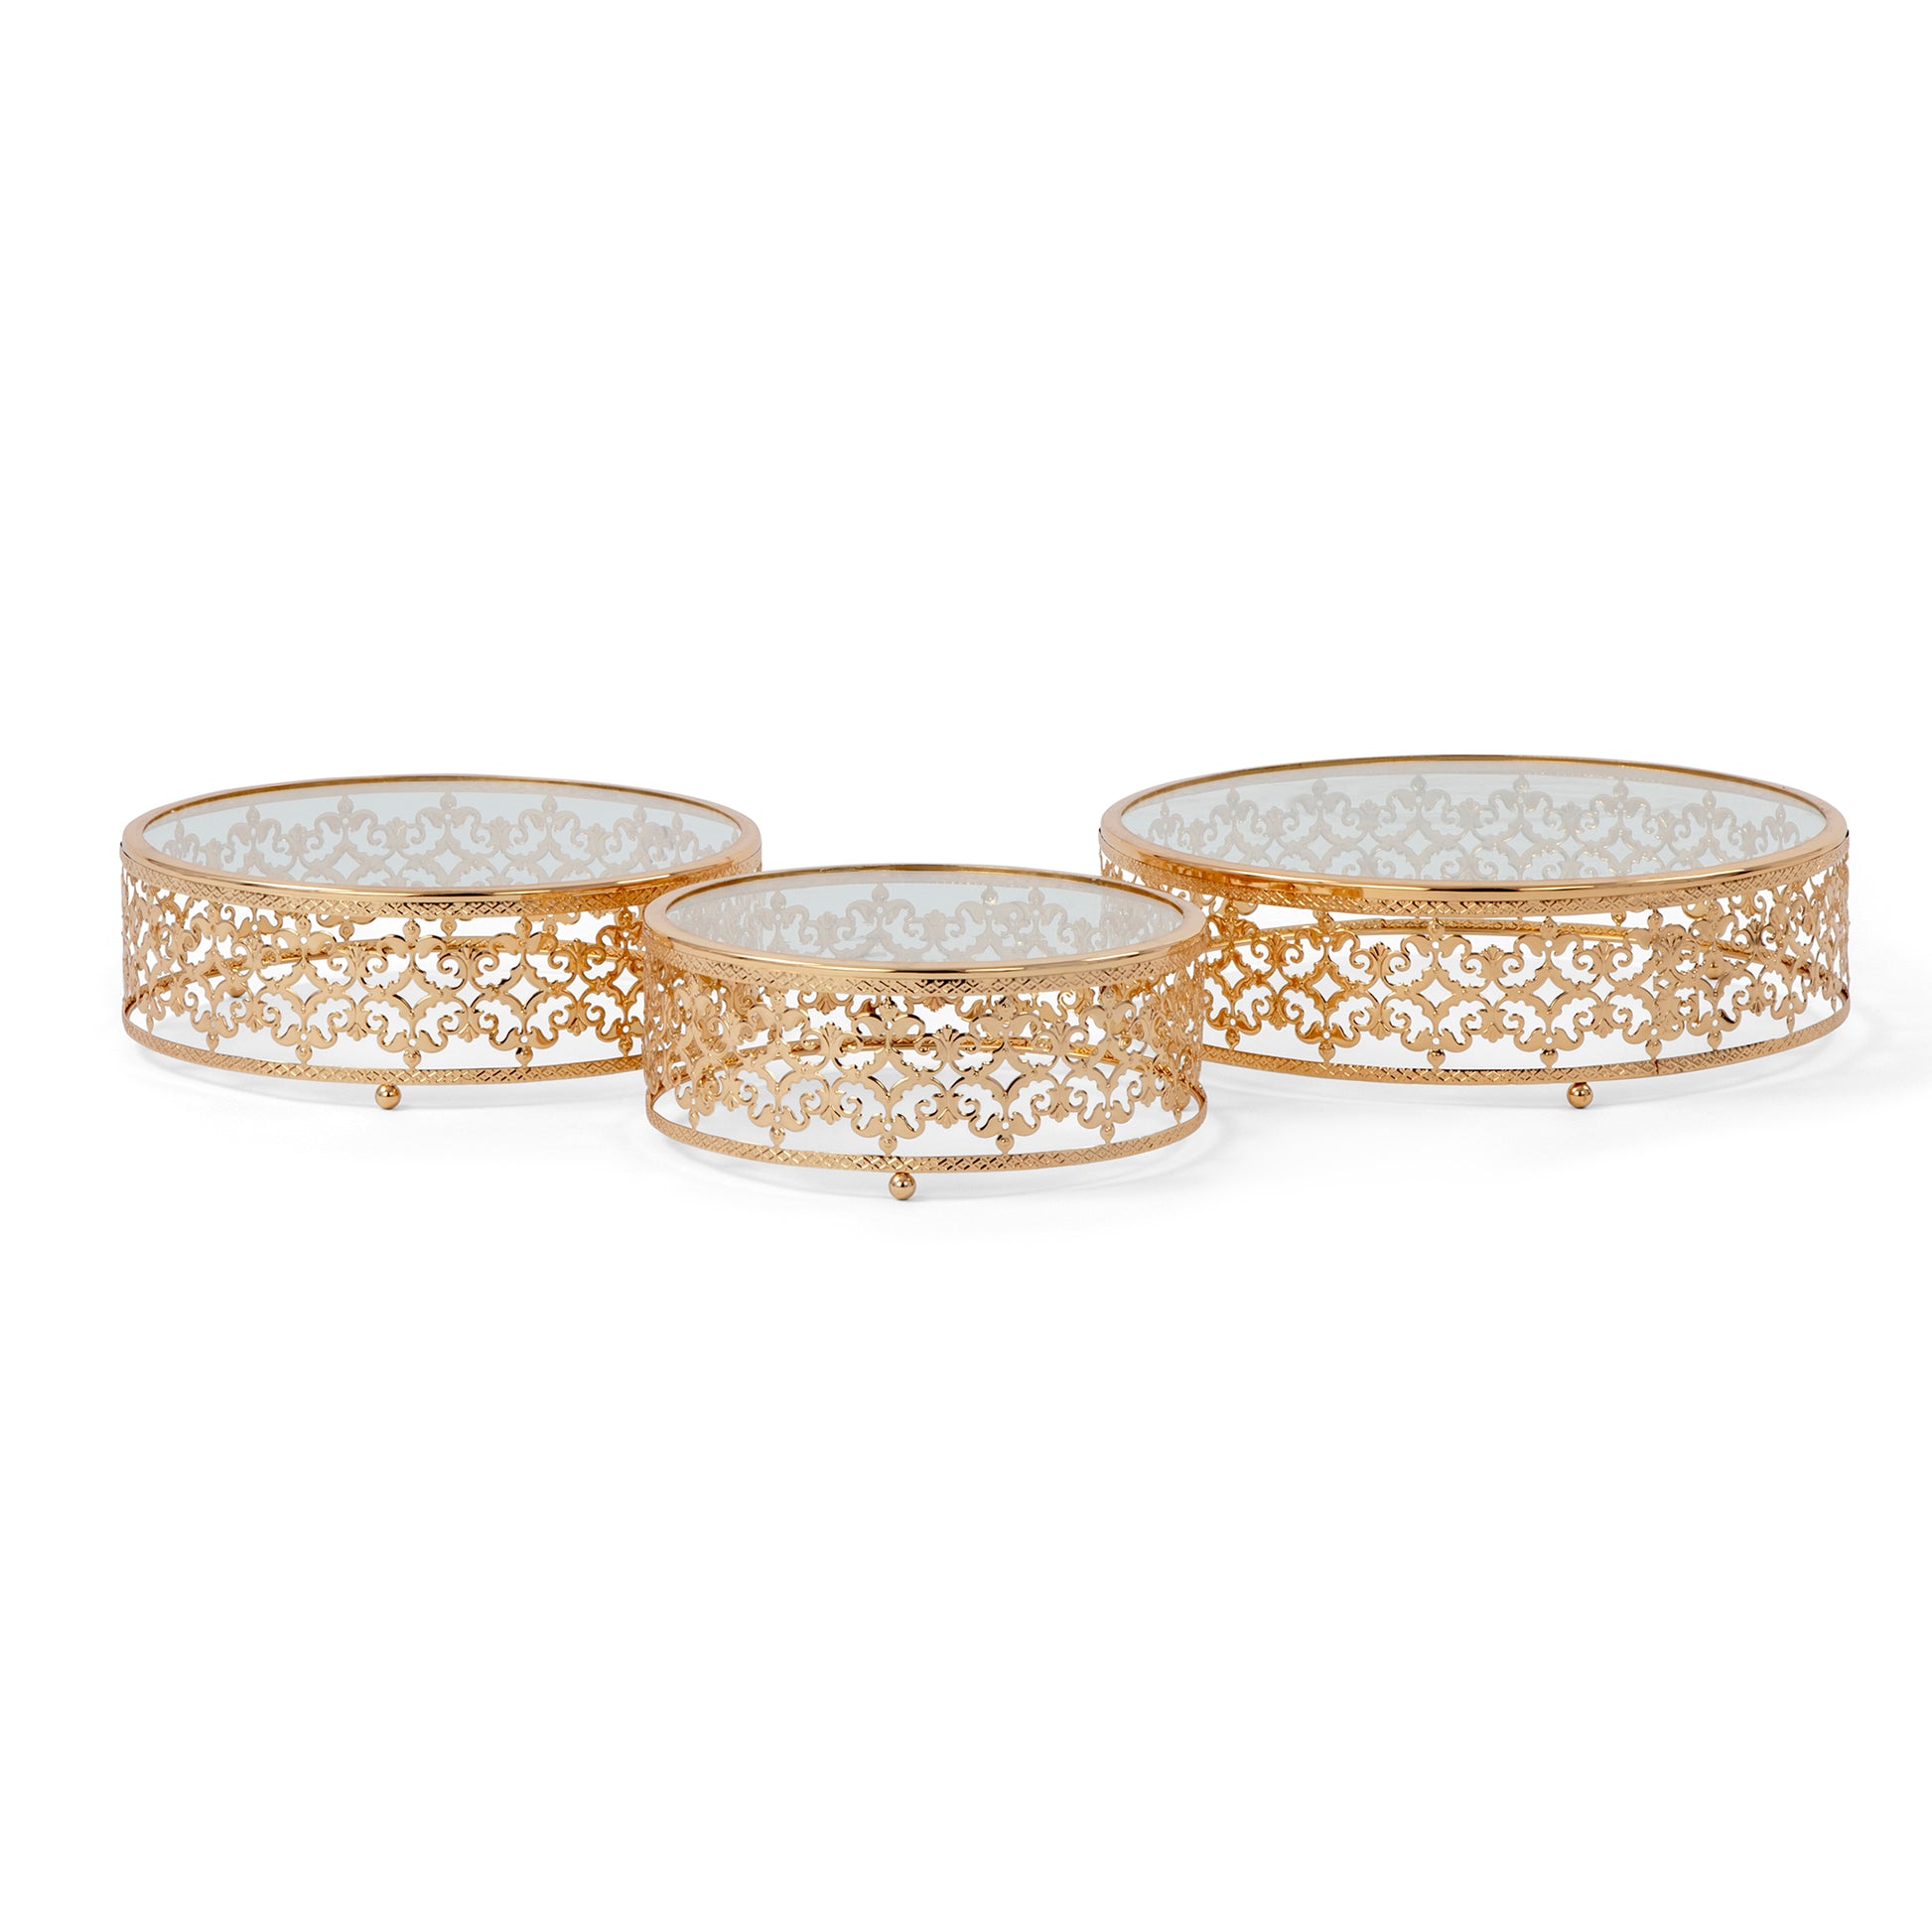 3 pc/set Luxe Round Cake Display Stands - Gold - CV Linens